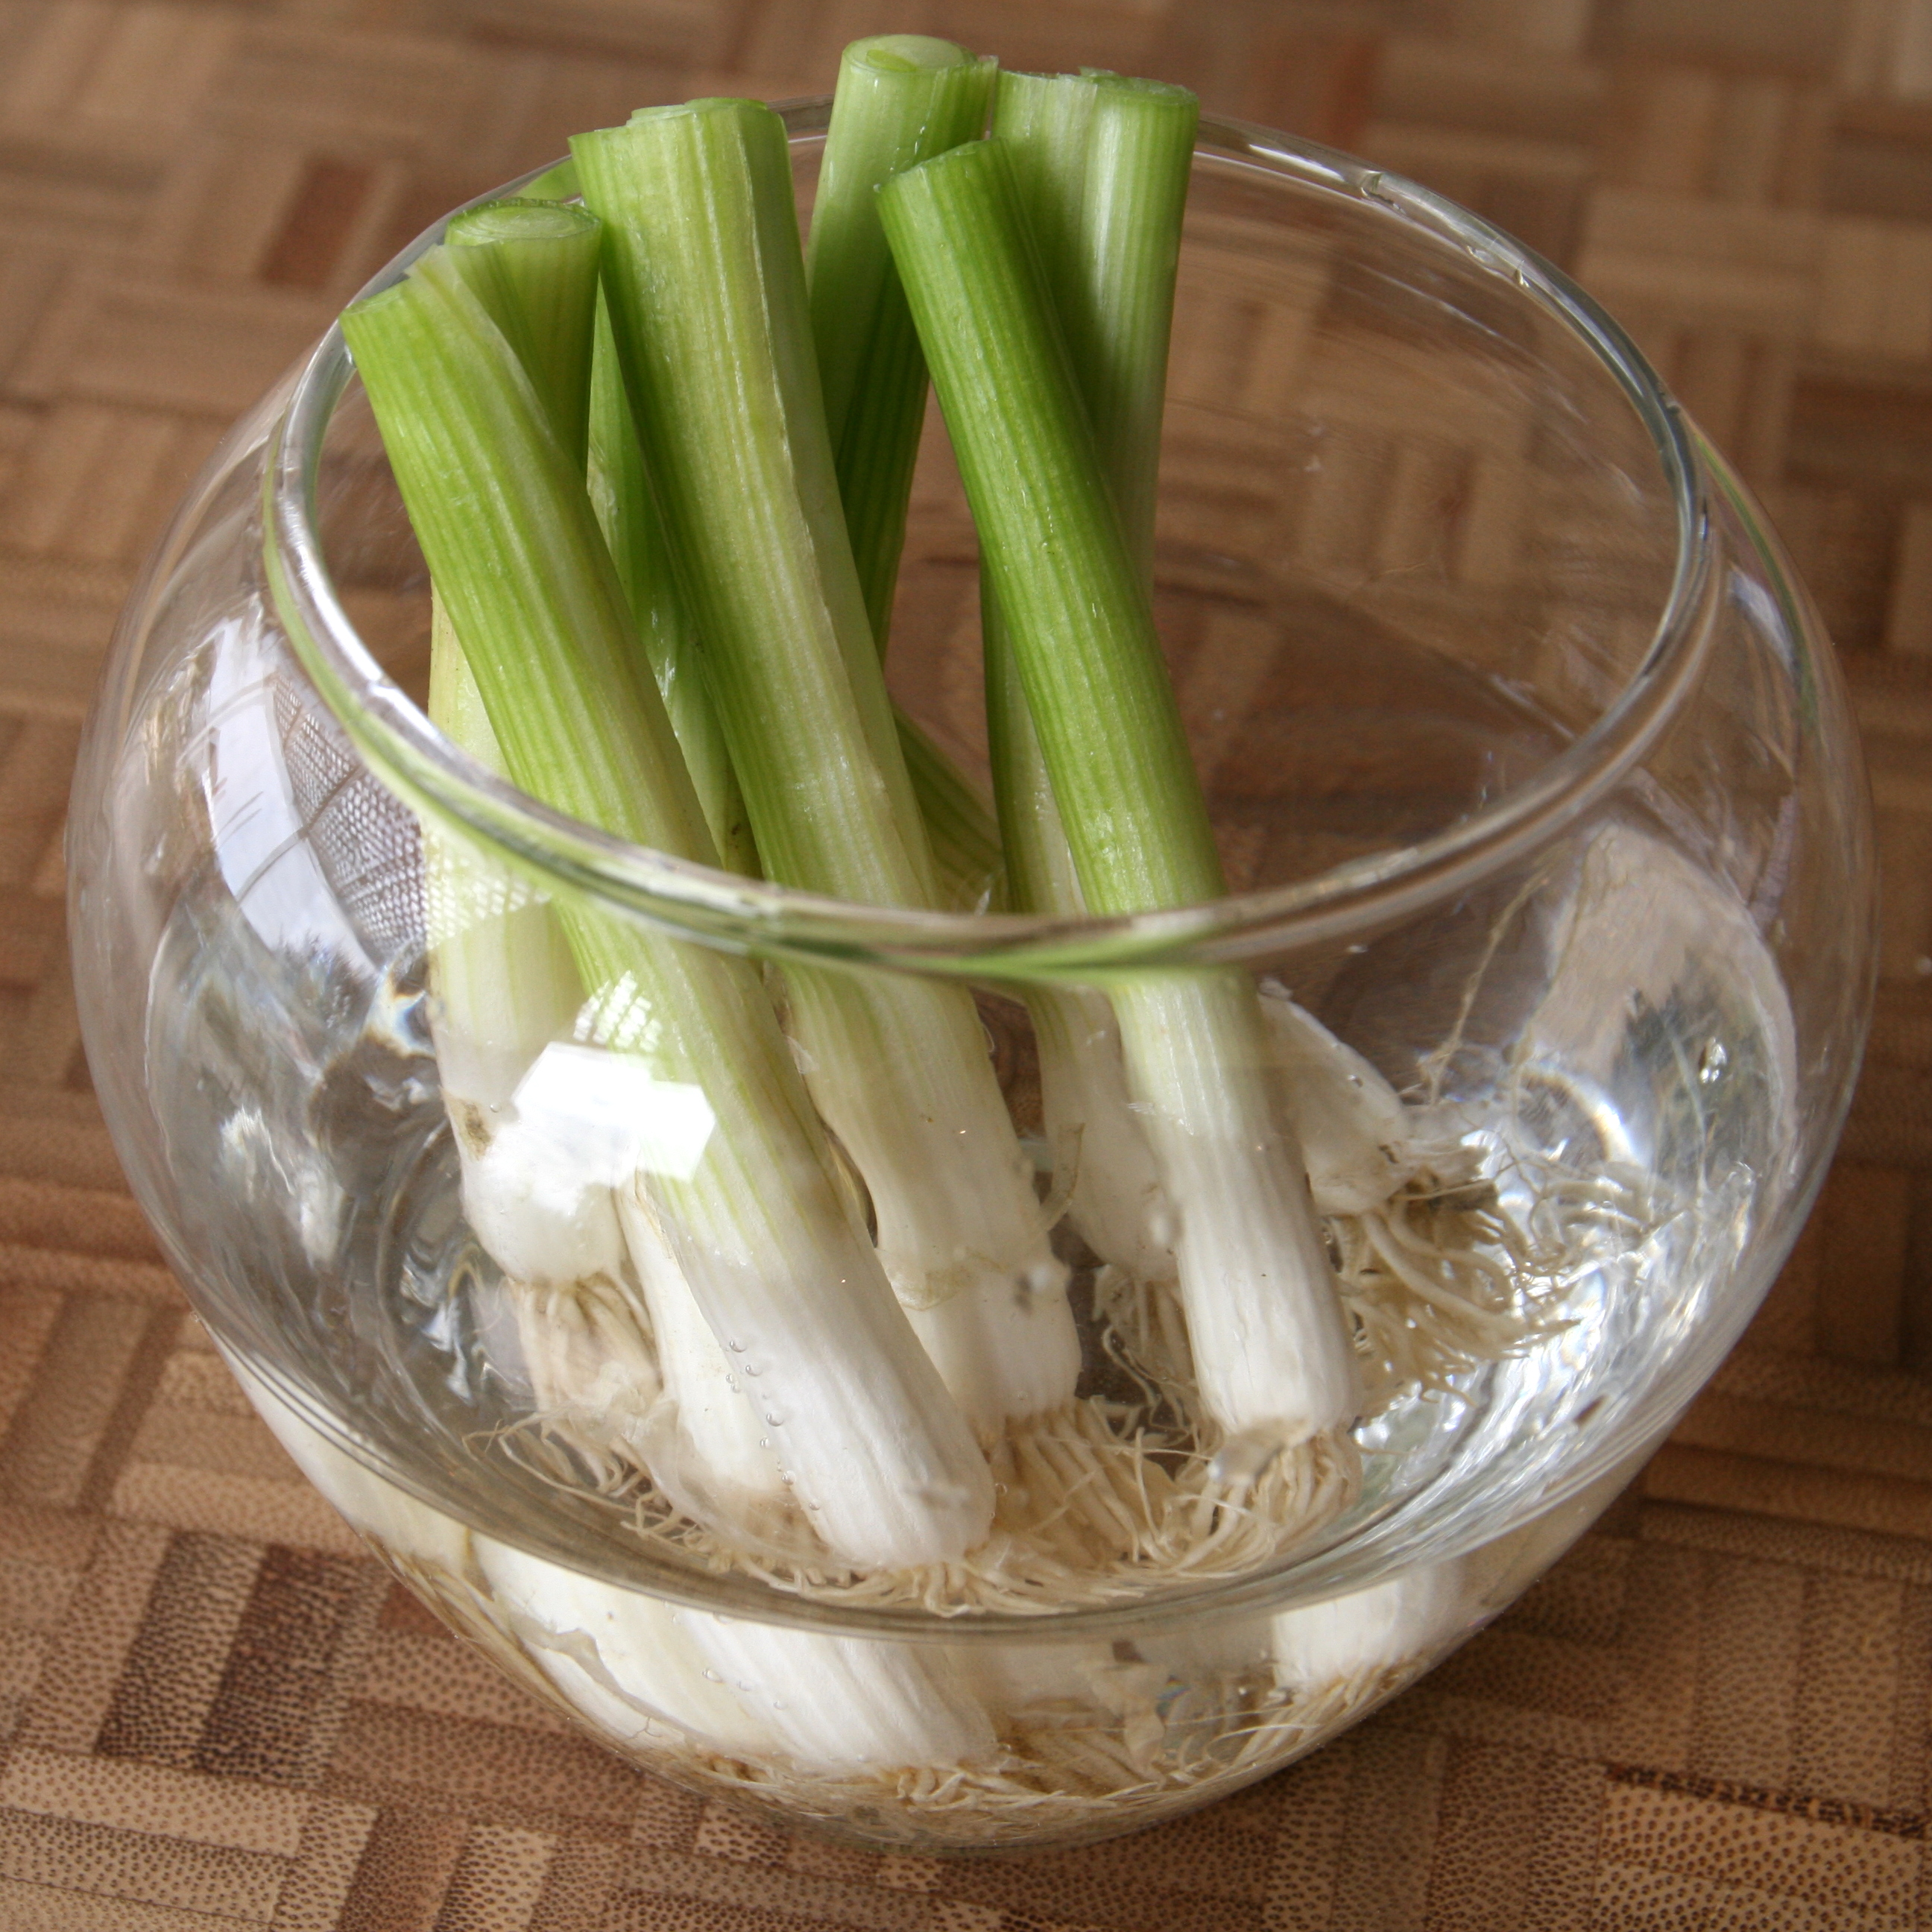 Cut ends of green onions grow in a bowl of water